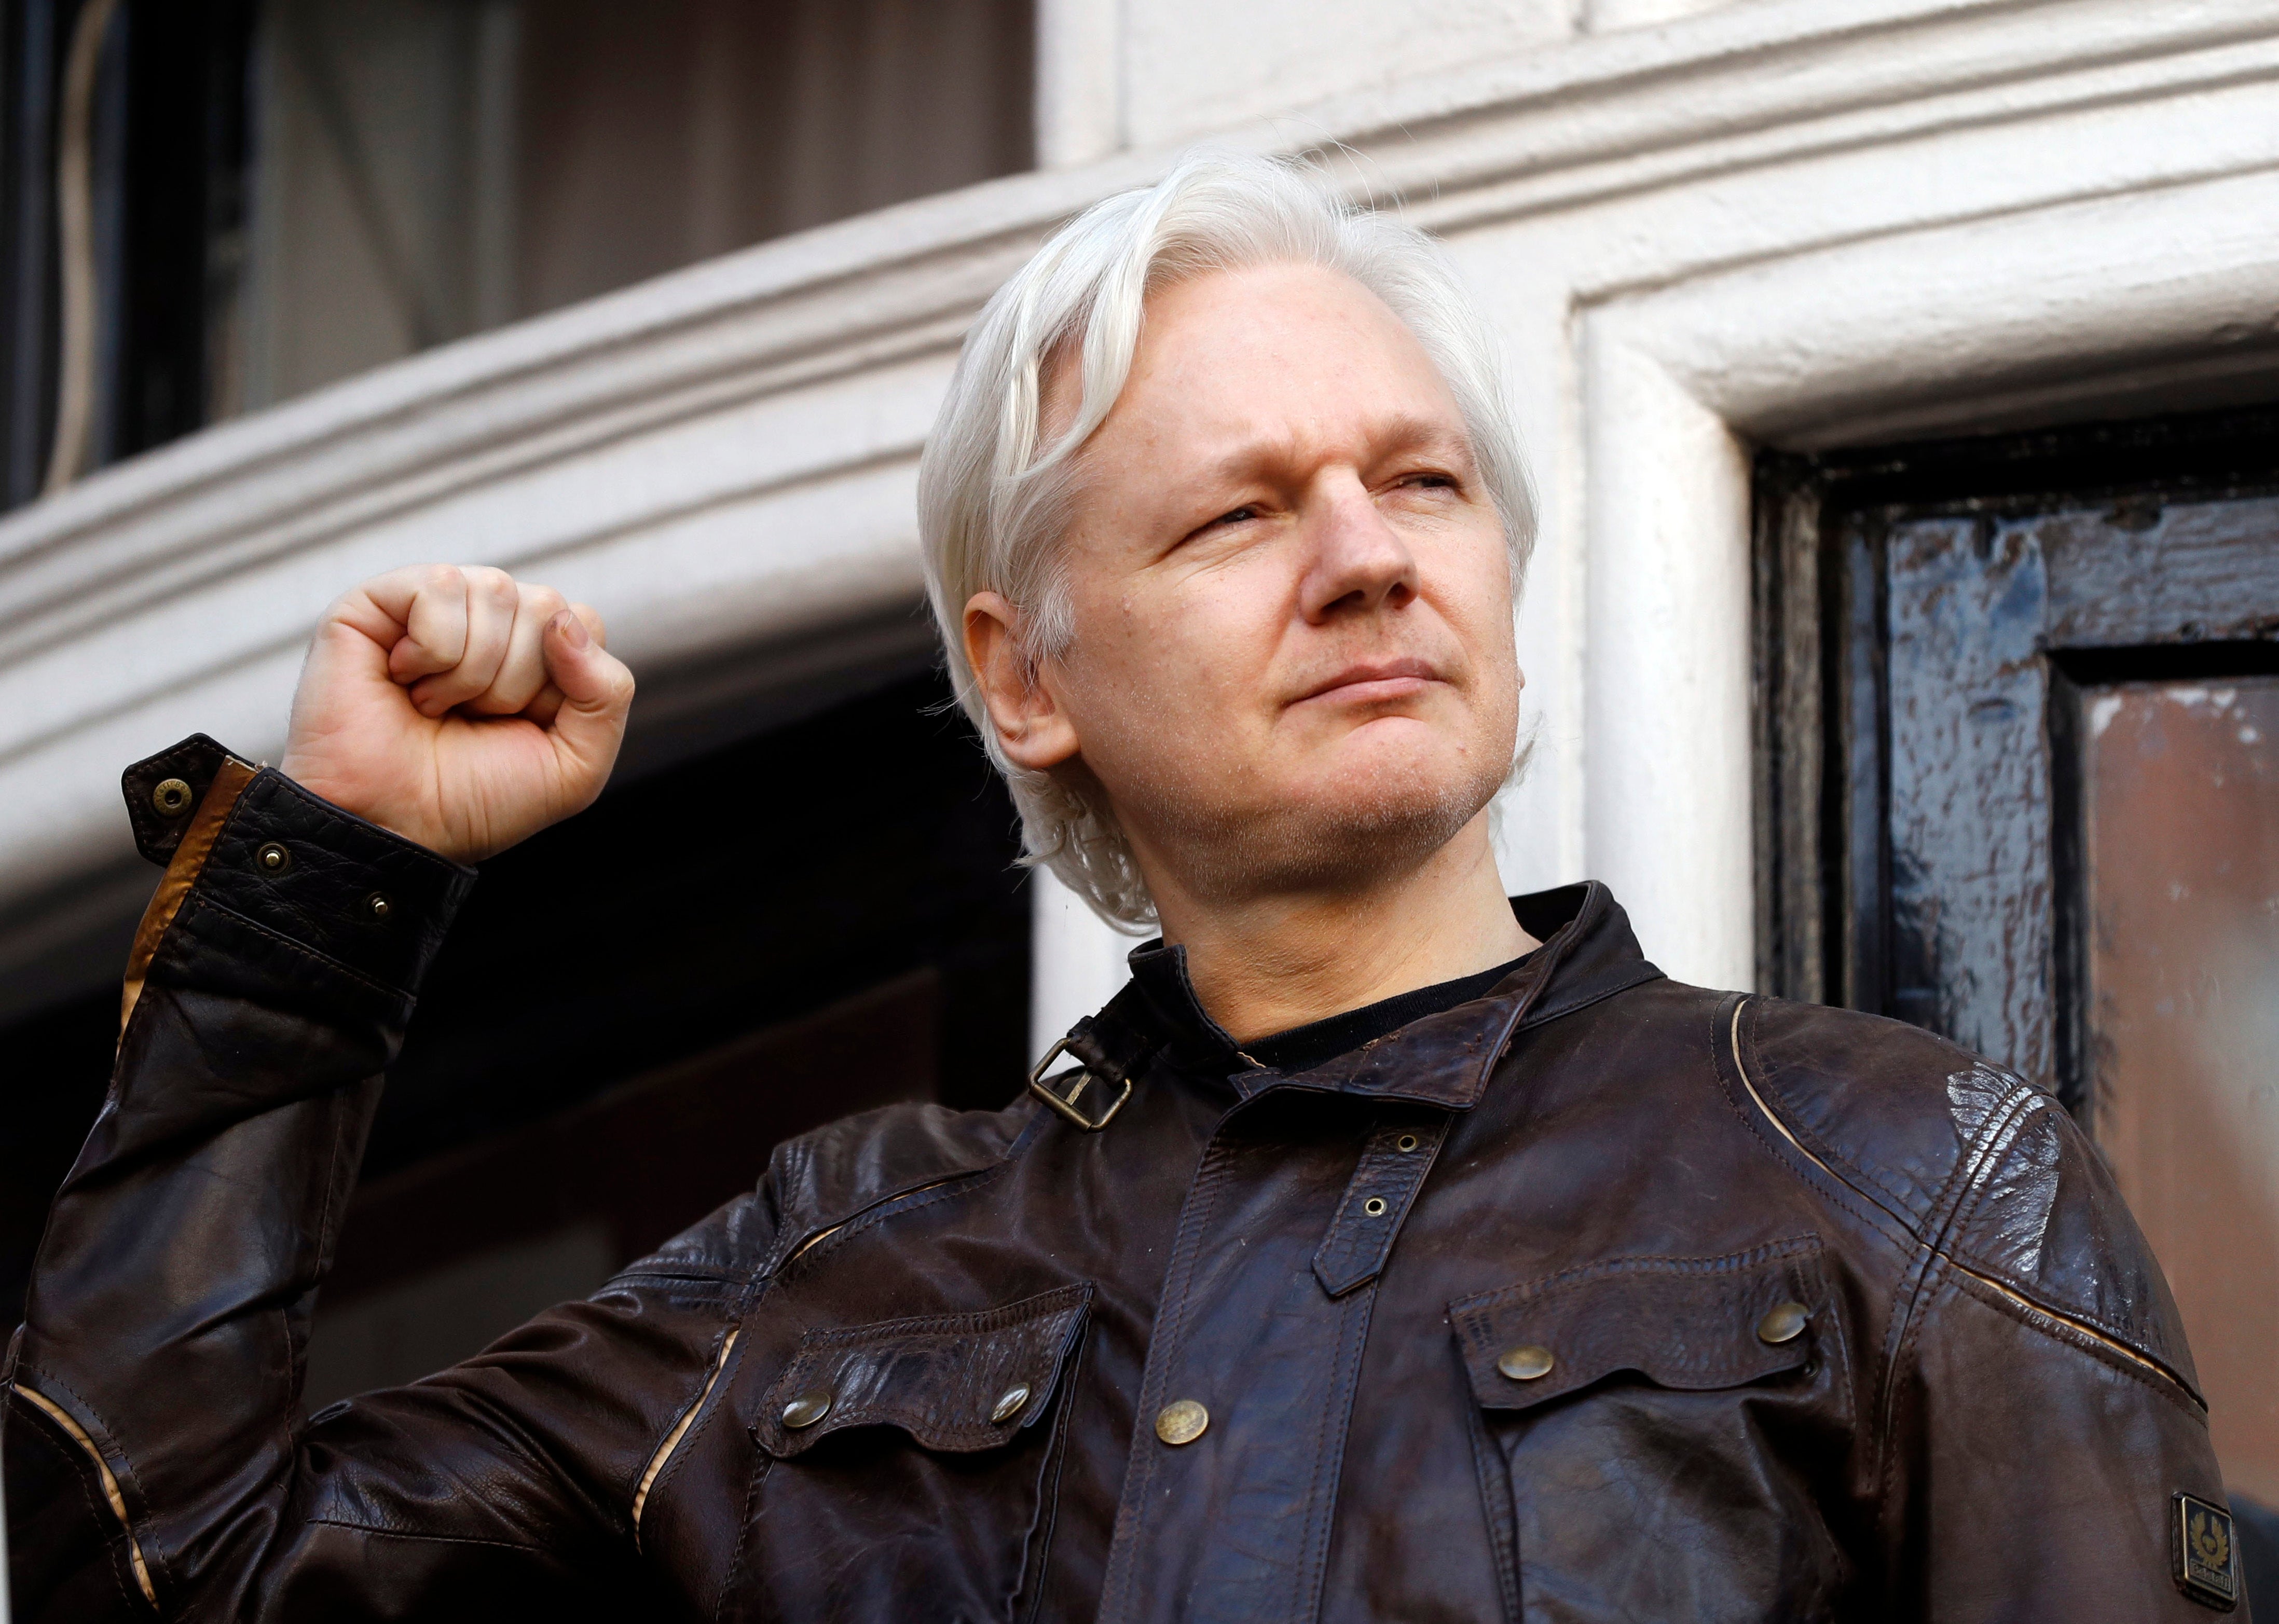 Julian Assange published leaked documents related to the Afghanistan and Iraq wars